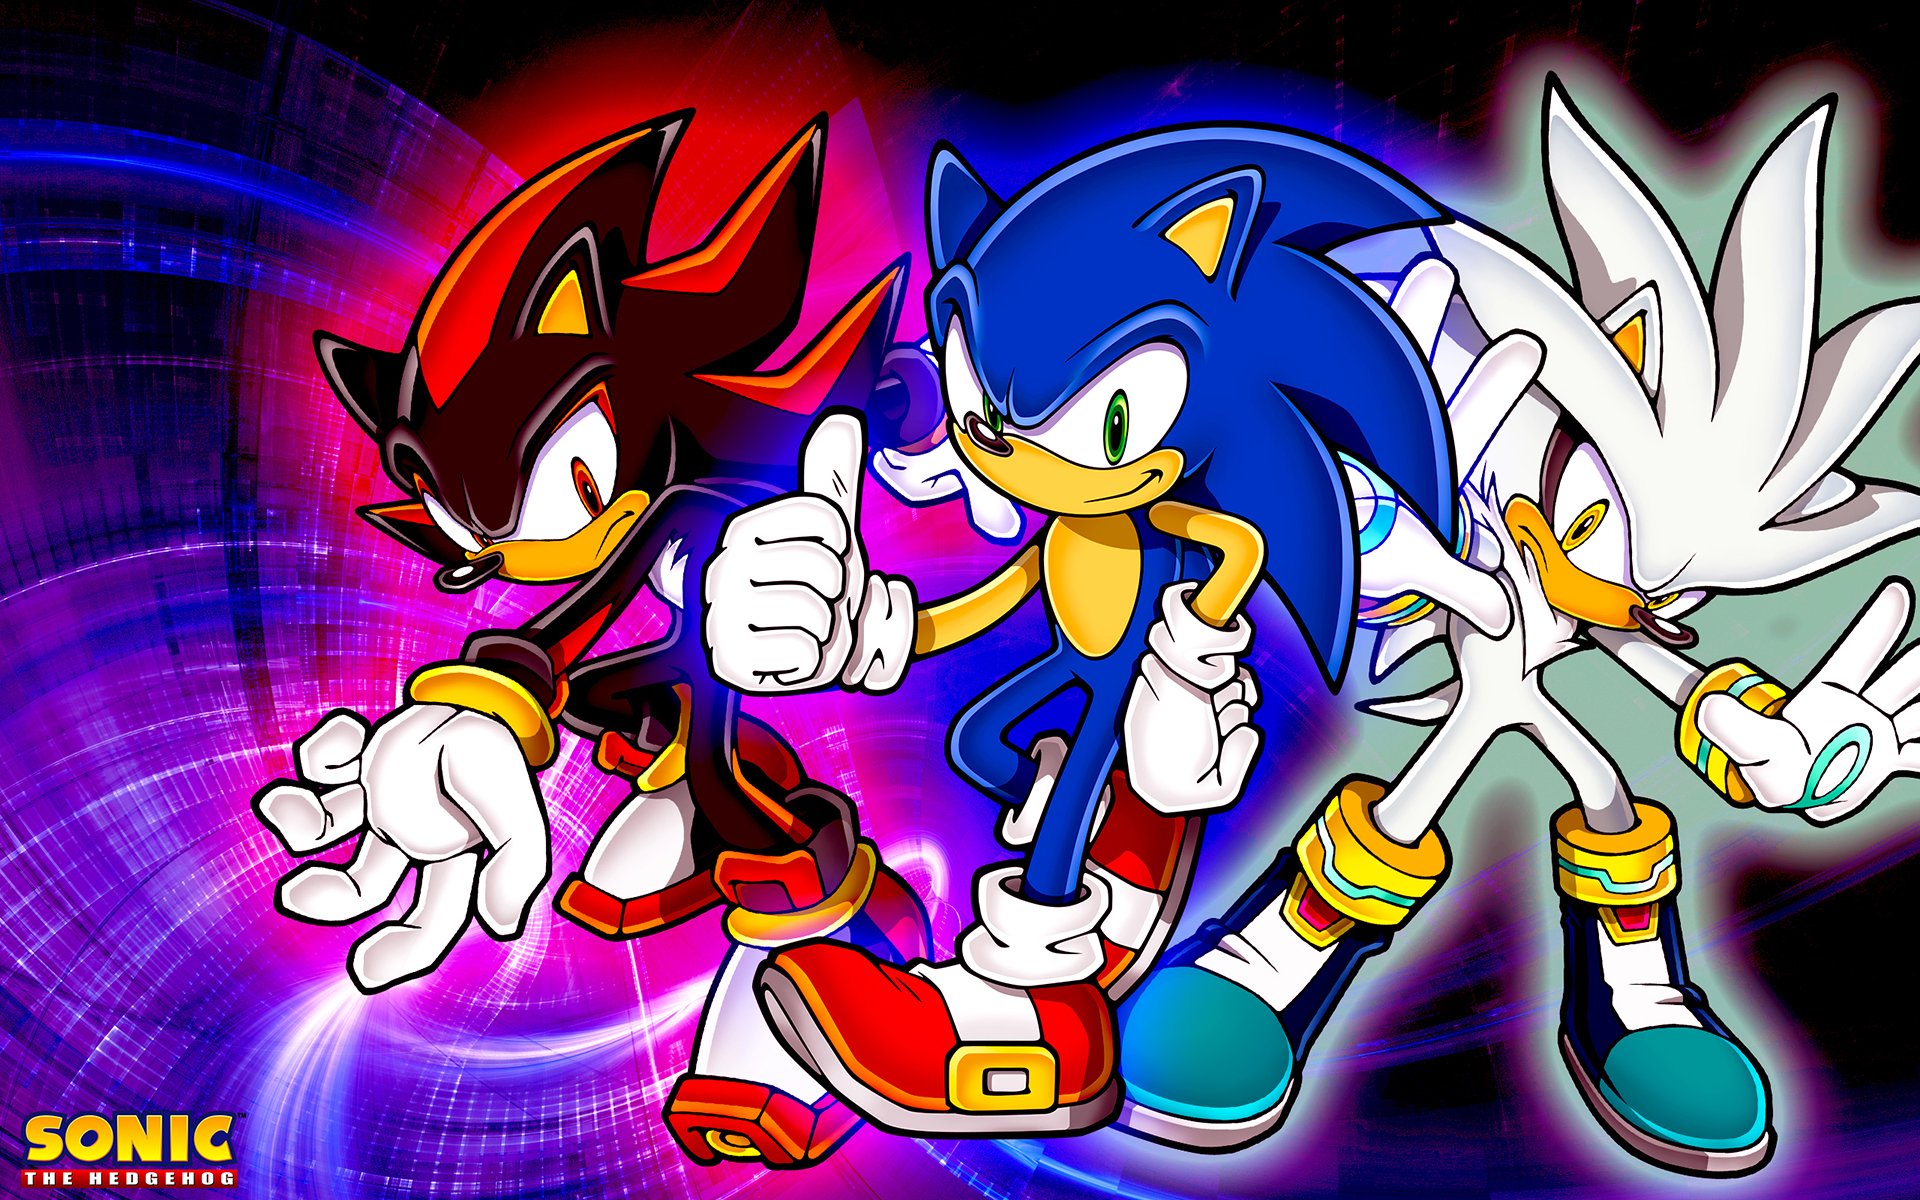 Sonic Shadow Anime Wallpaper Pictures In High Quality